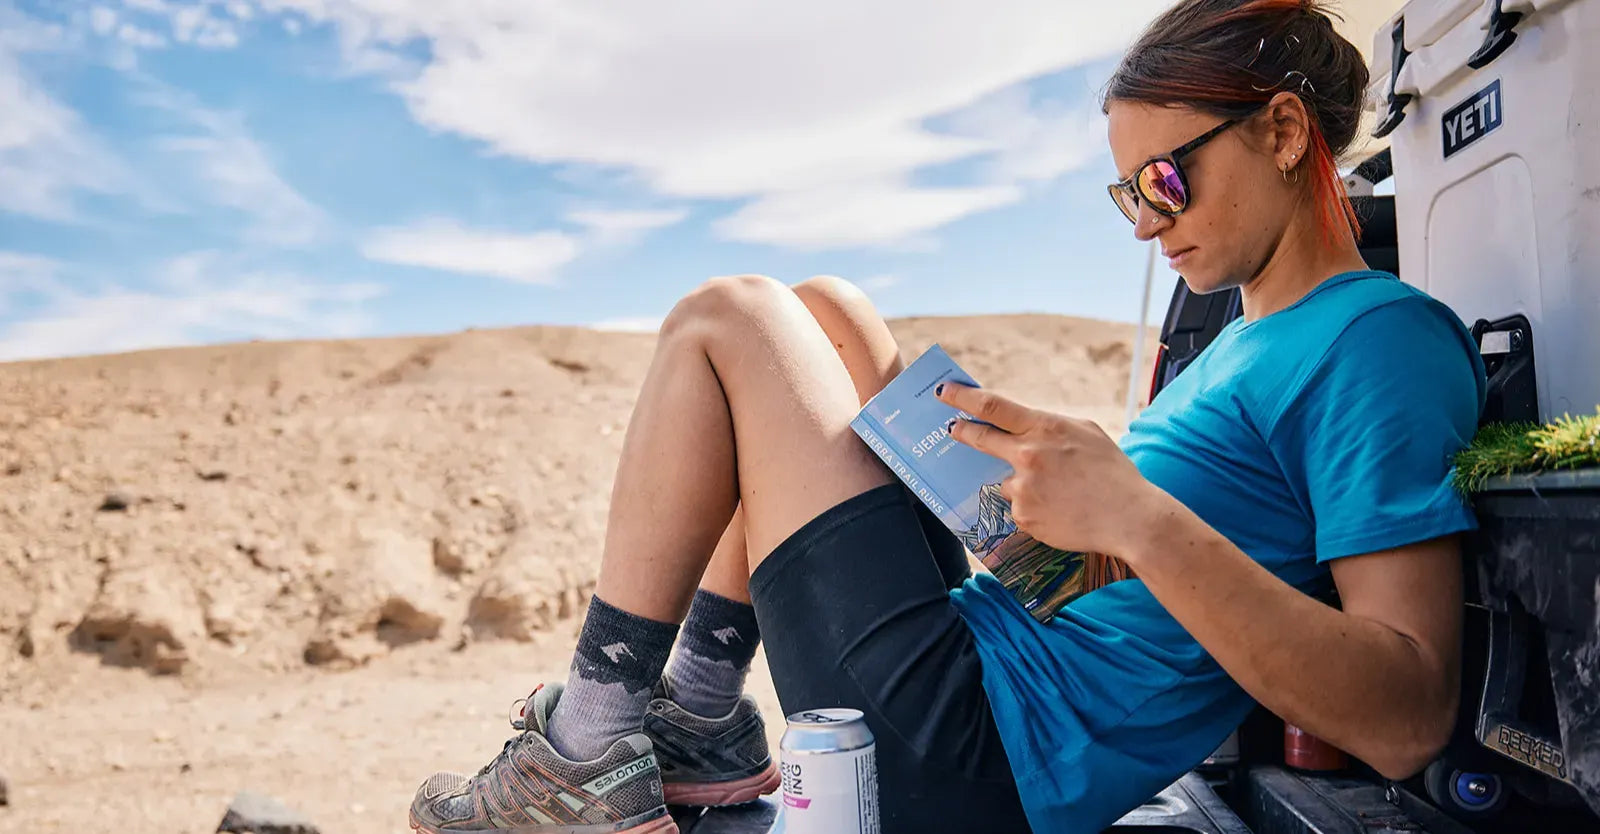 A woman reads the Sierra Trail Runs guide book in the back of a truck on a sunny warm day in the desert